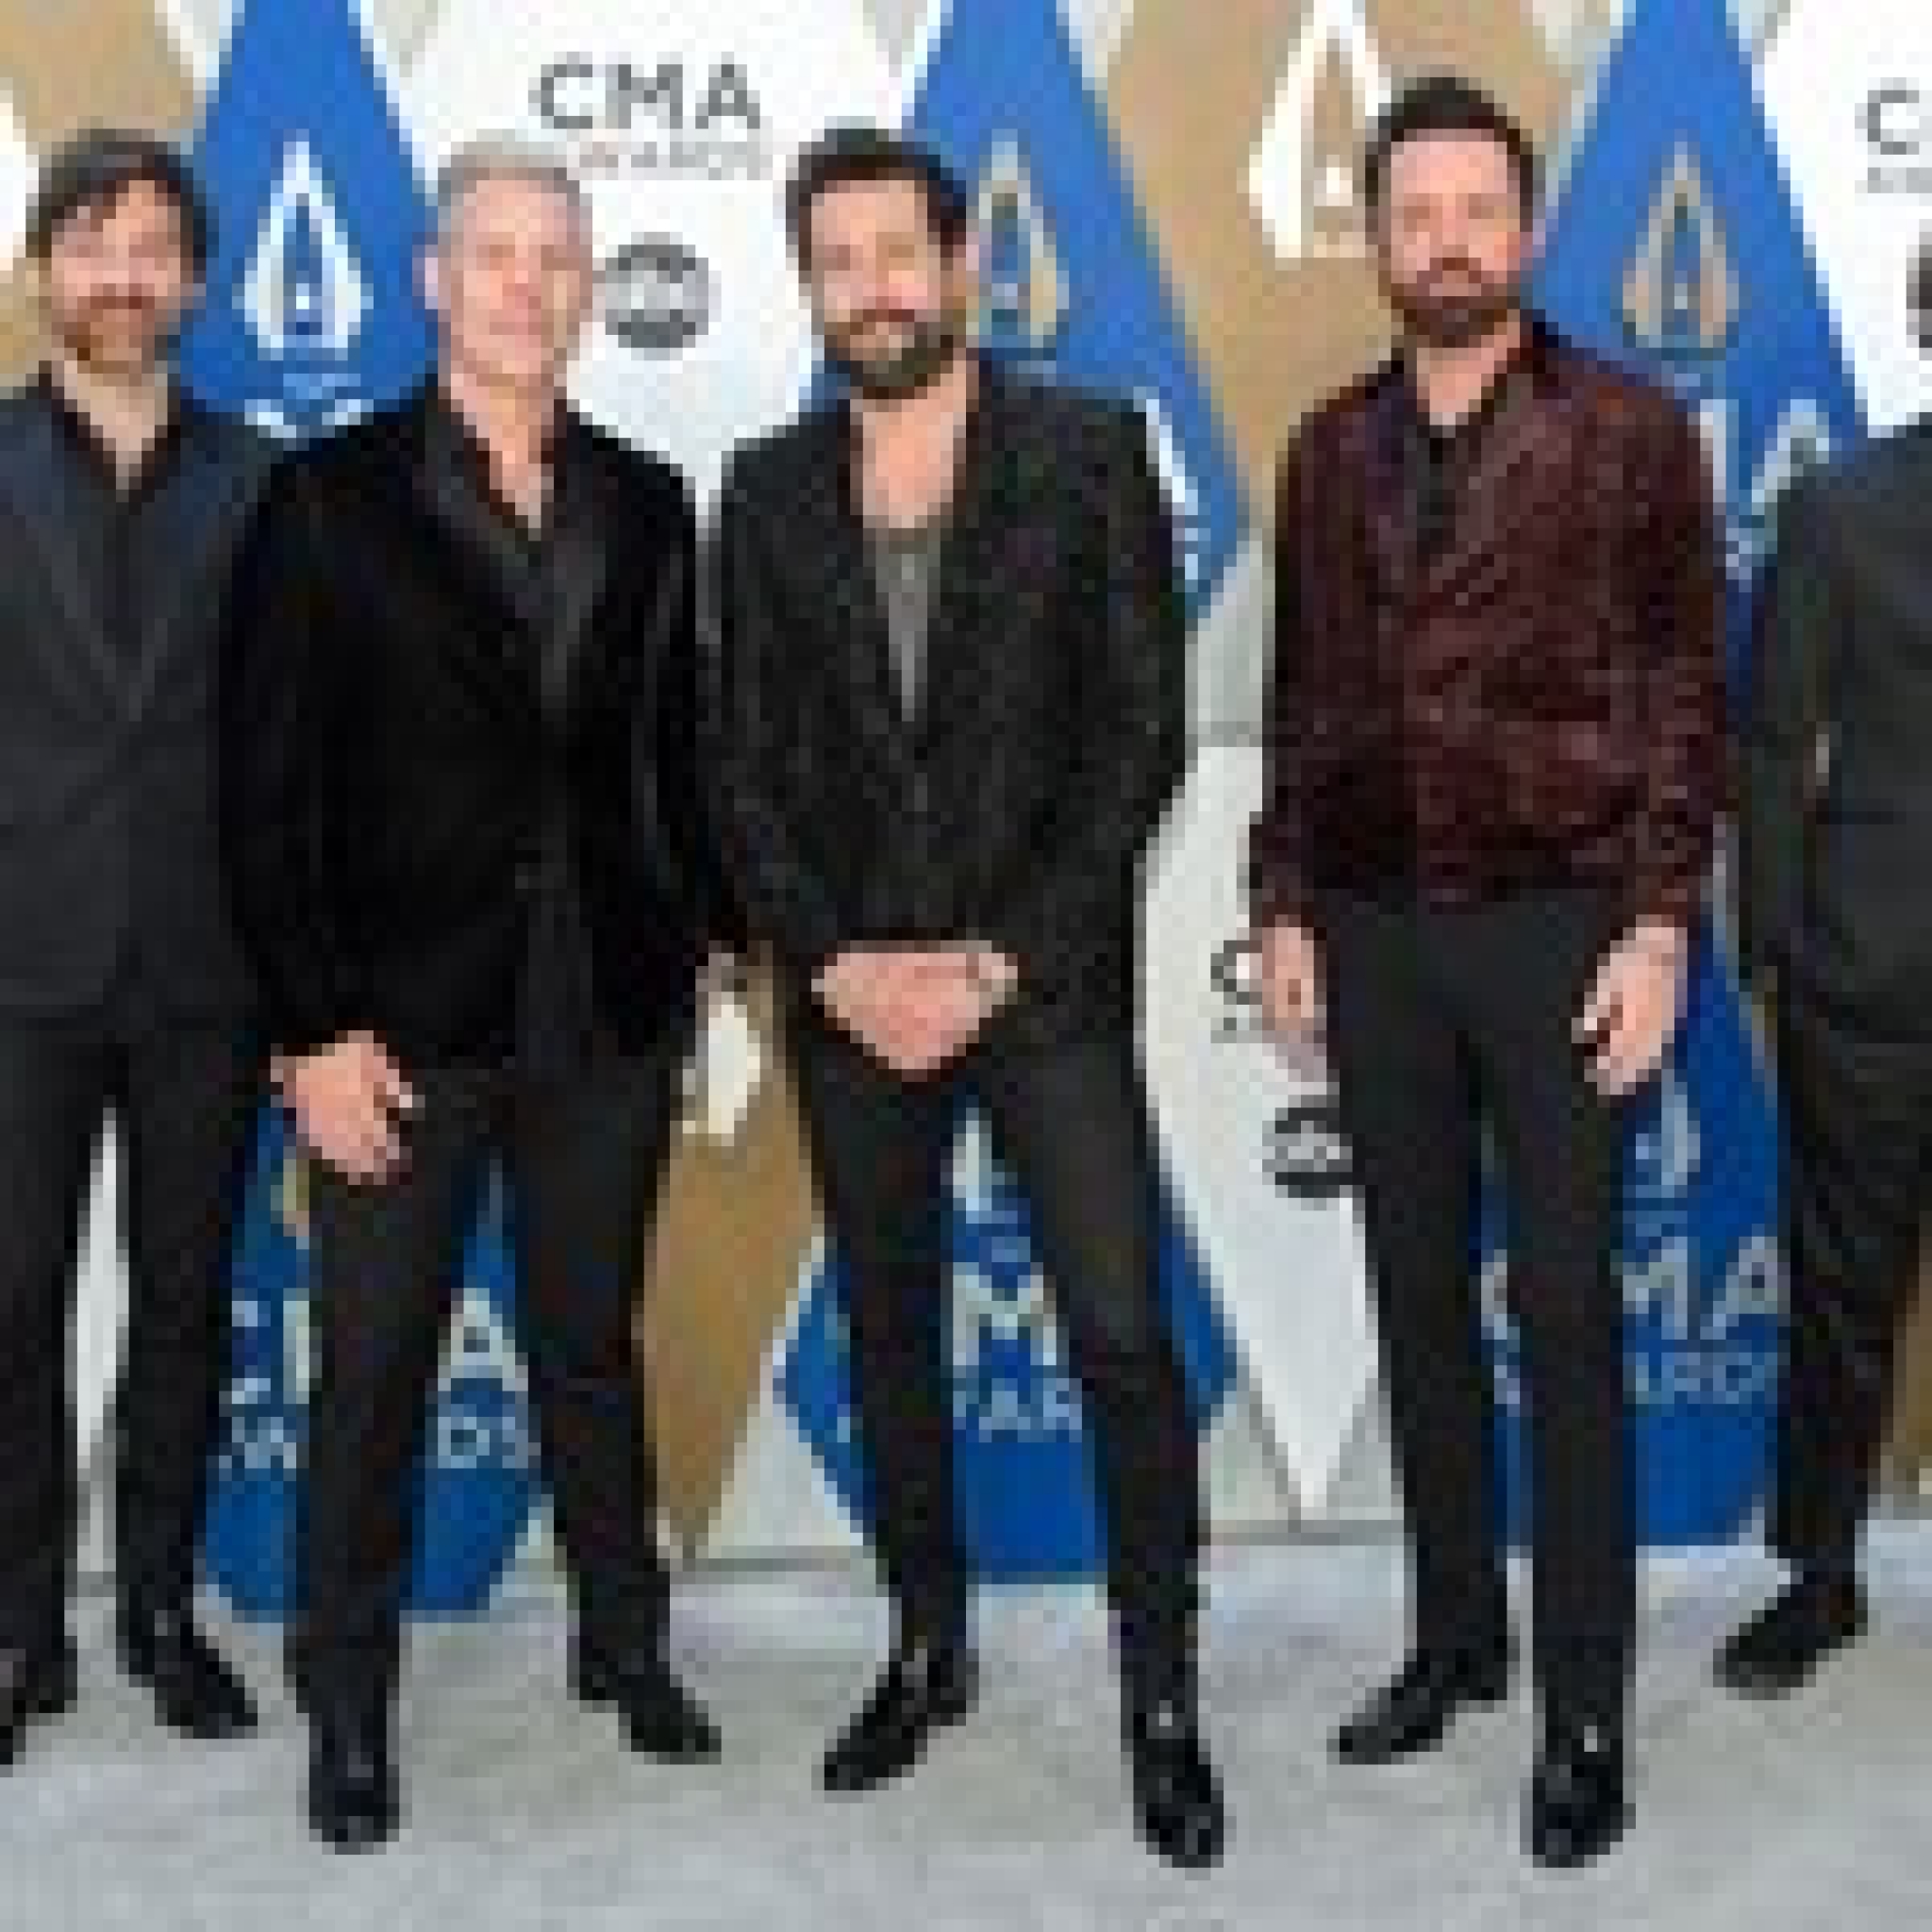 Old Dominion Singer Matthew Ramsey Hospitalized Ahead of Tour